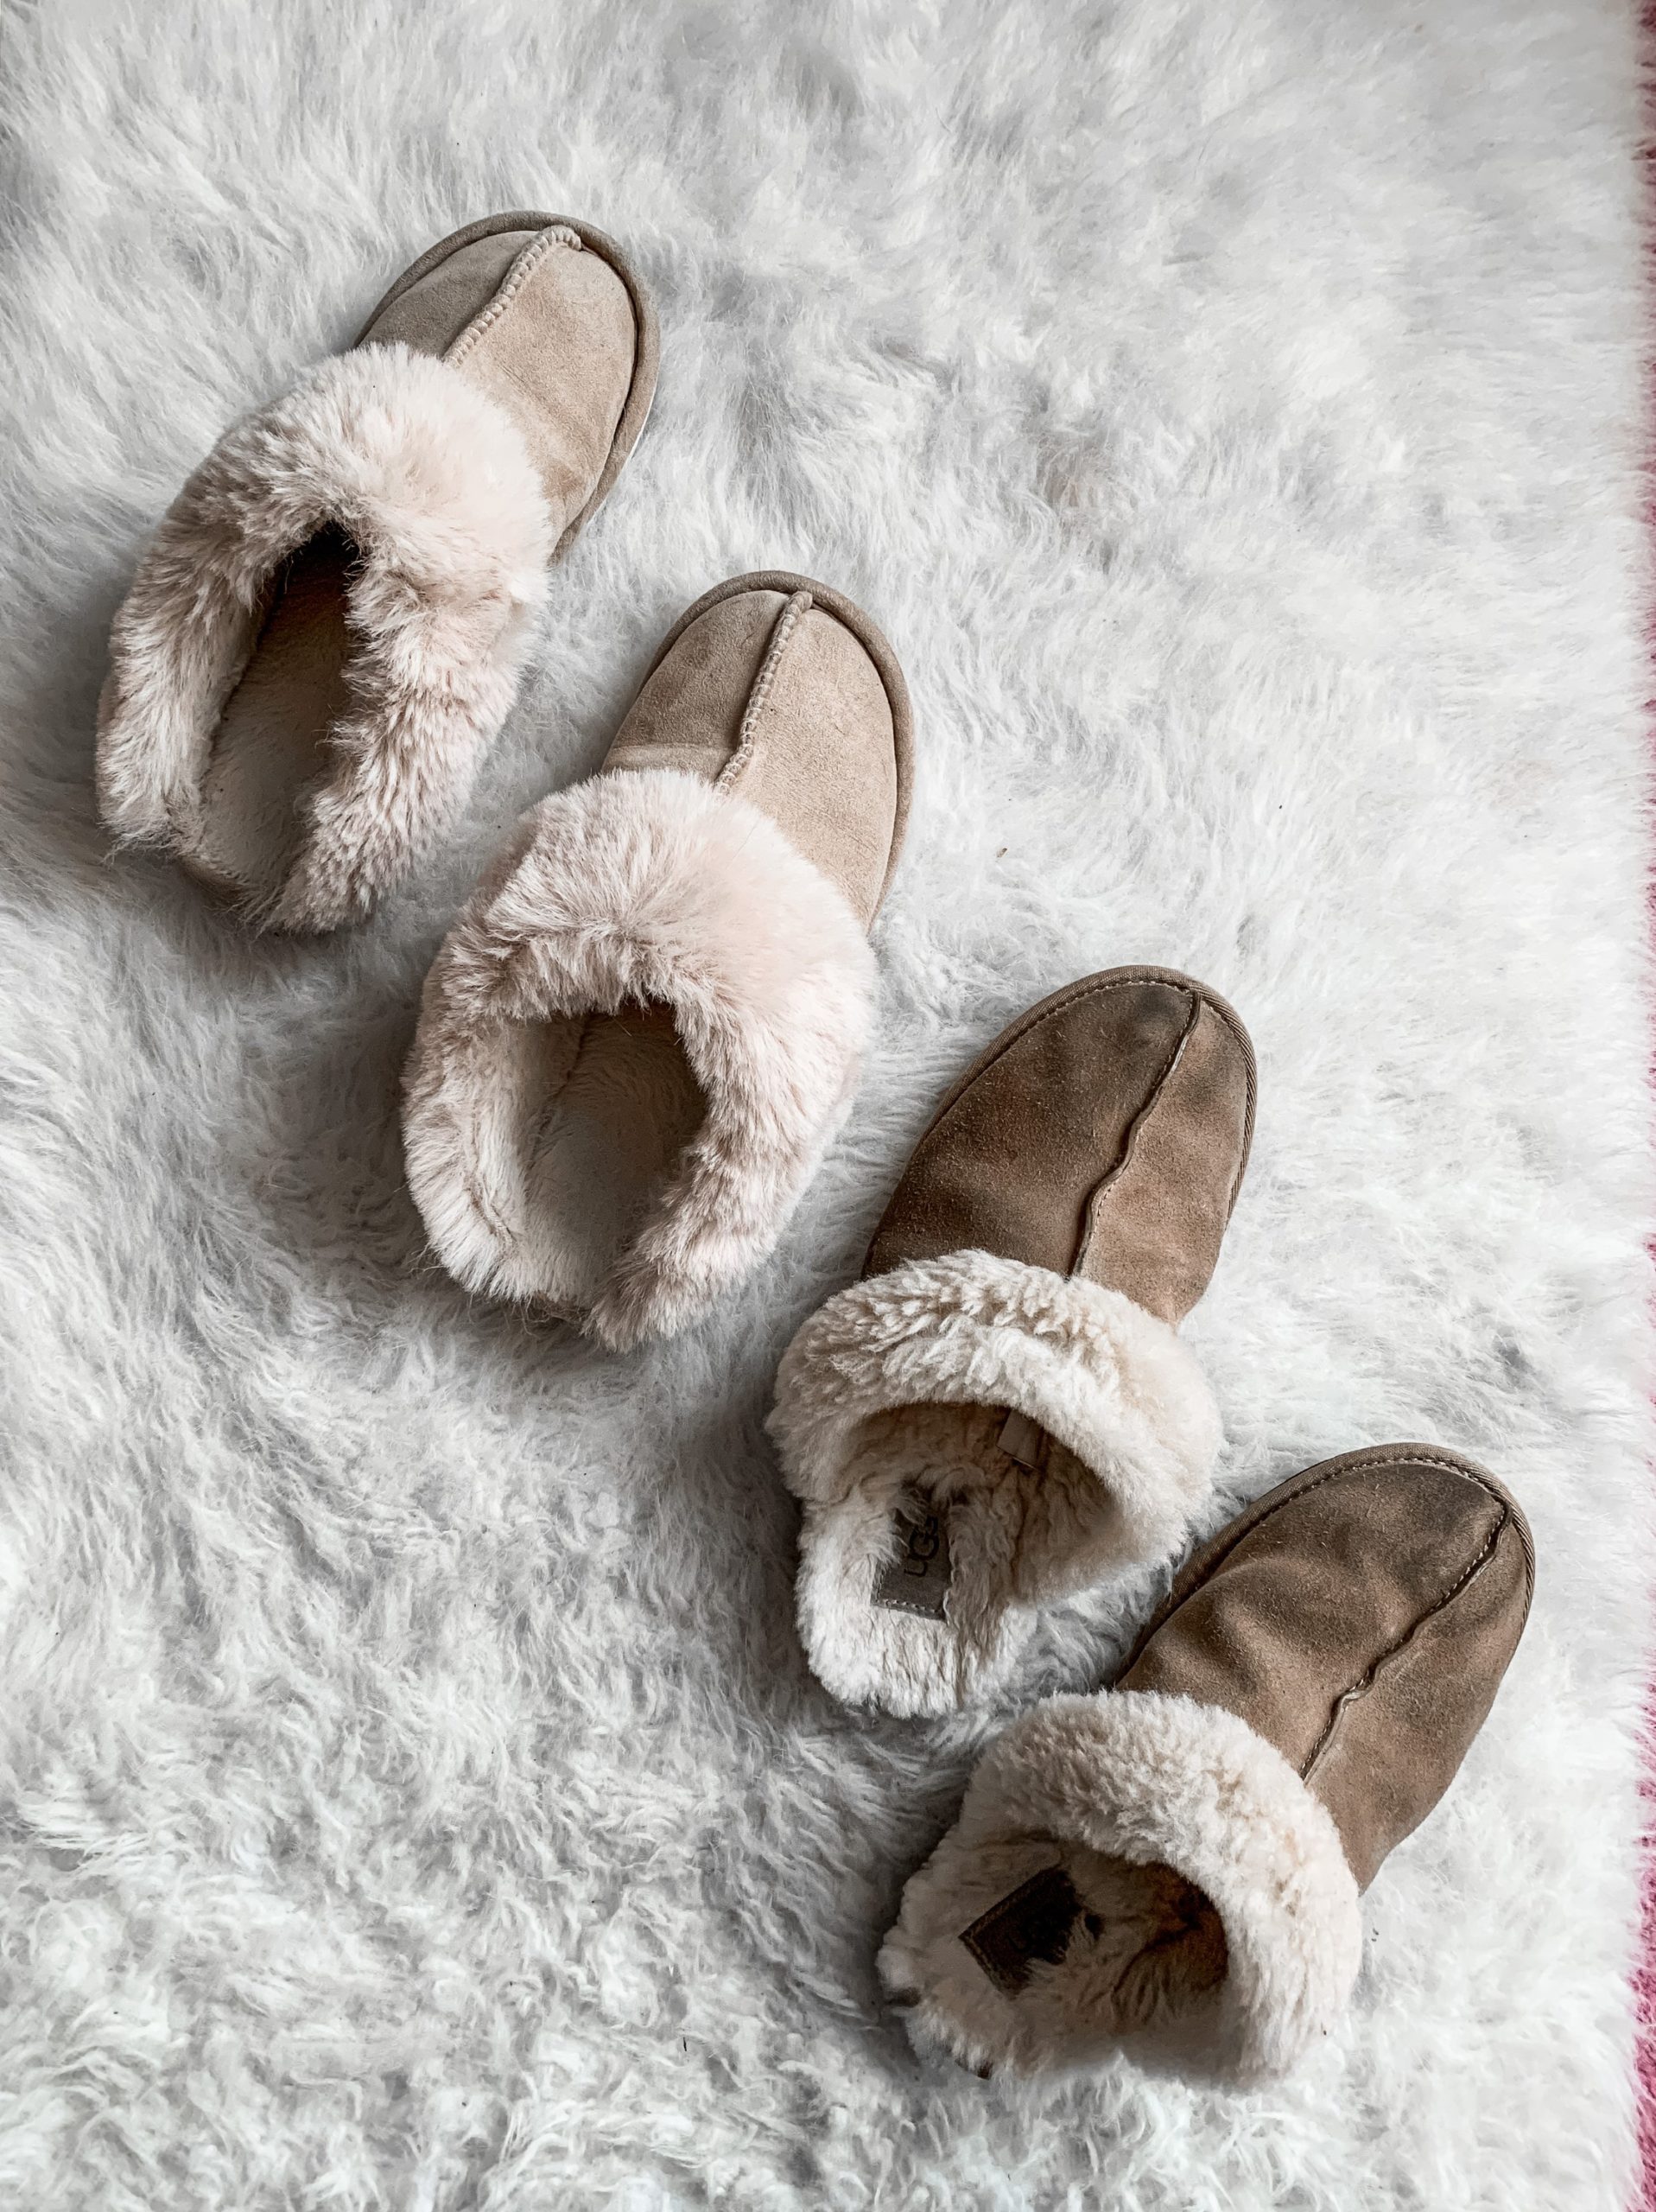 DUPED: UGG SLIPPERS - The Best UGG Slipper Dupes are $20 on Amazon!